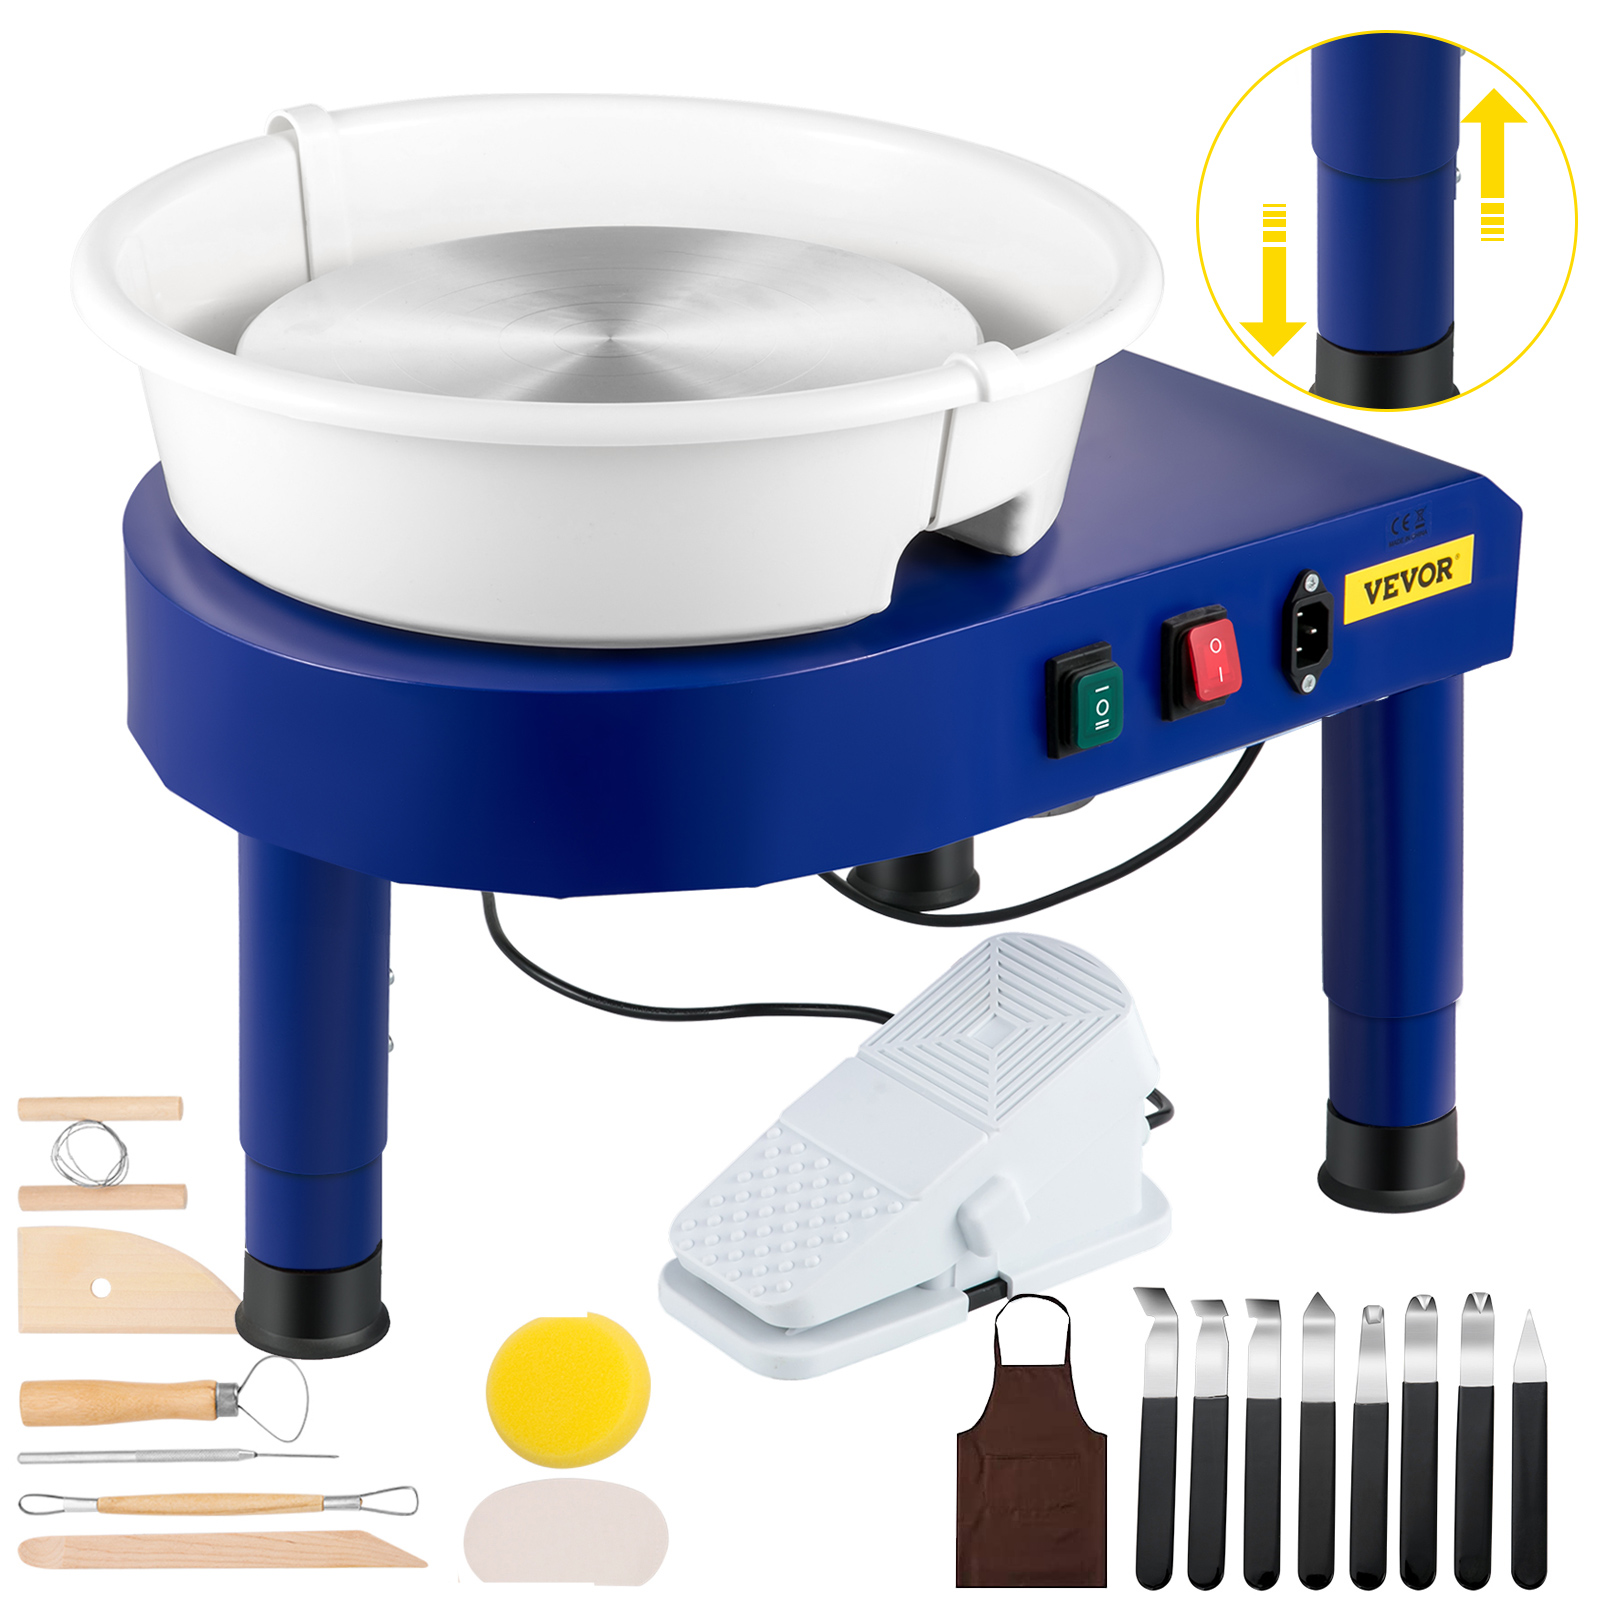 VEVOR 9.8 in. Pottery Wheel 280 W Art Craft DIY Clay Tool with